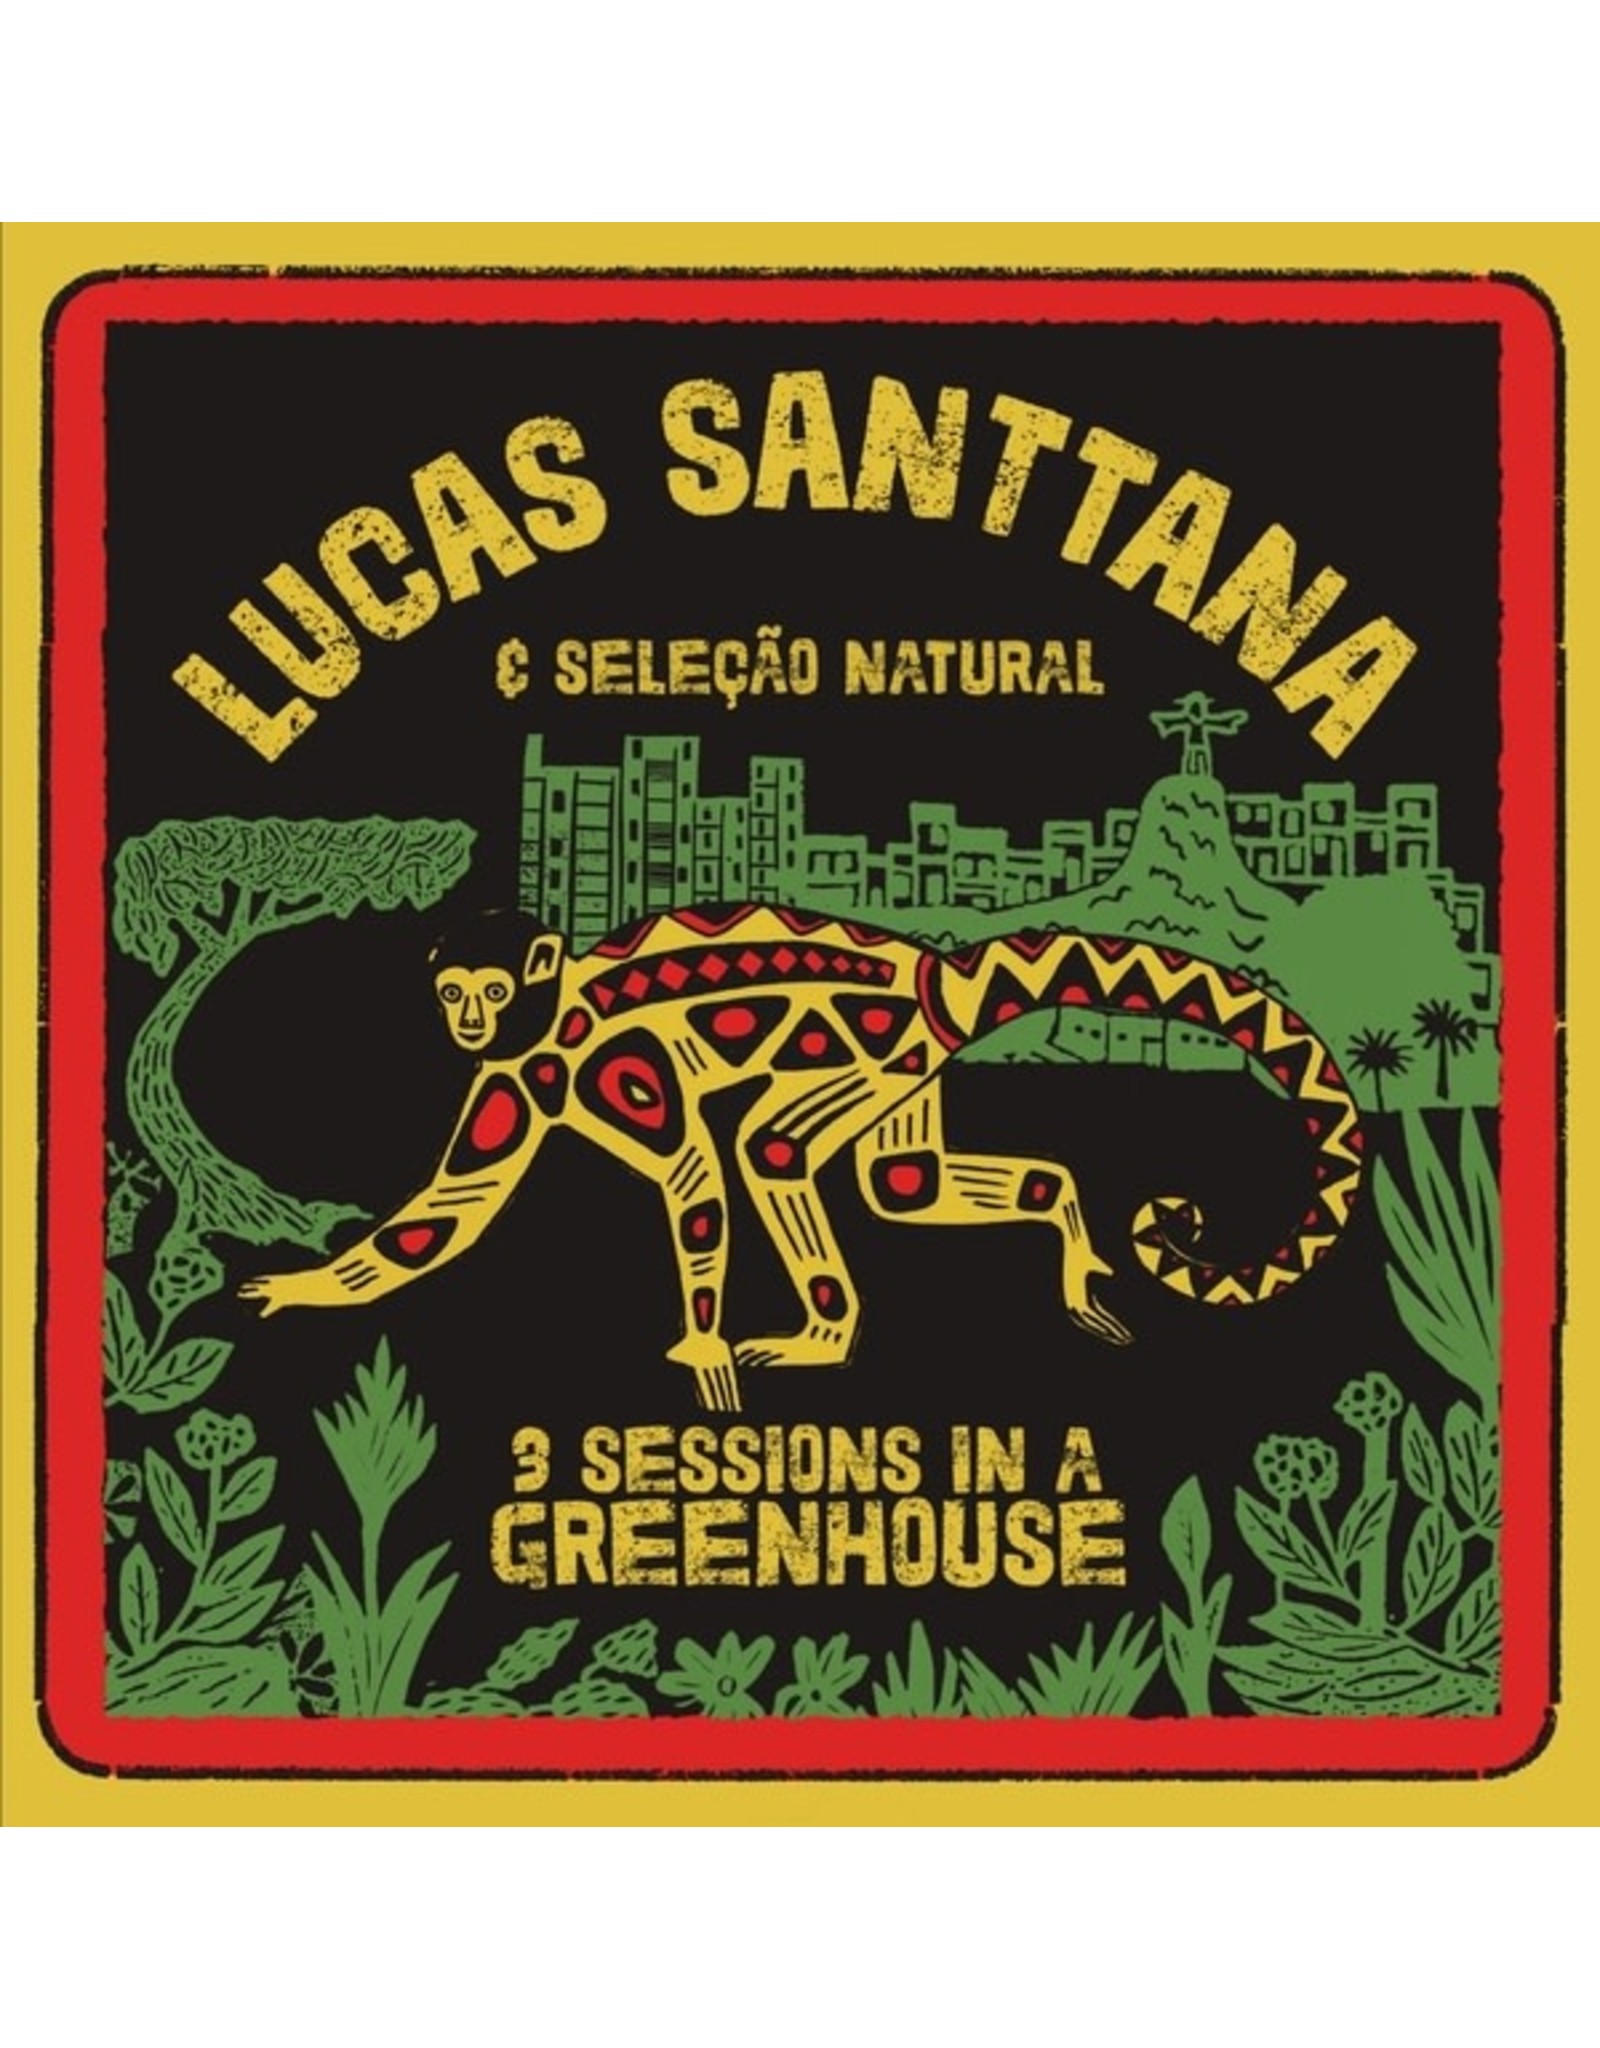 New Vinyl Lucas Santtana - 3 Sessions In A Greenhouse LP